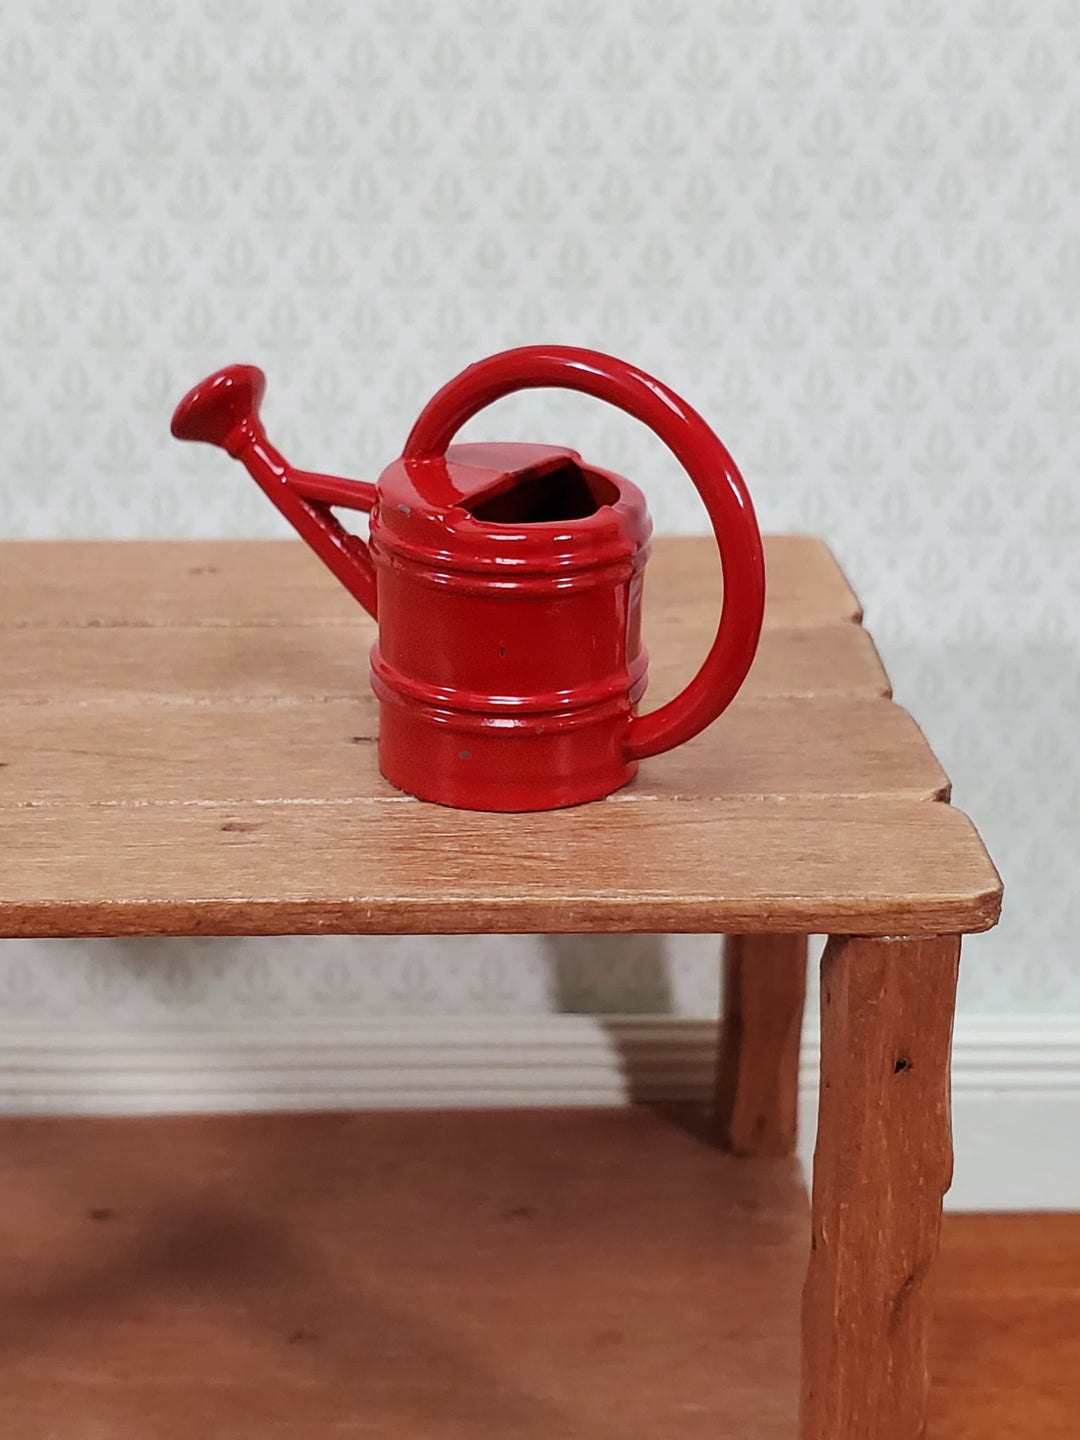 Dollhouse Metal Watering Can with Handle RED 1:12 Scale Miniature Garden - Miniature Crush